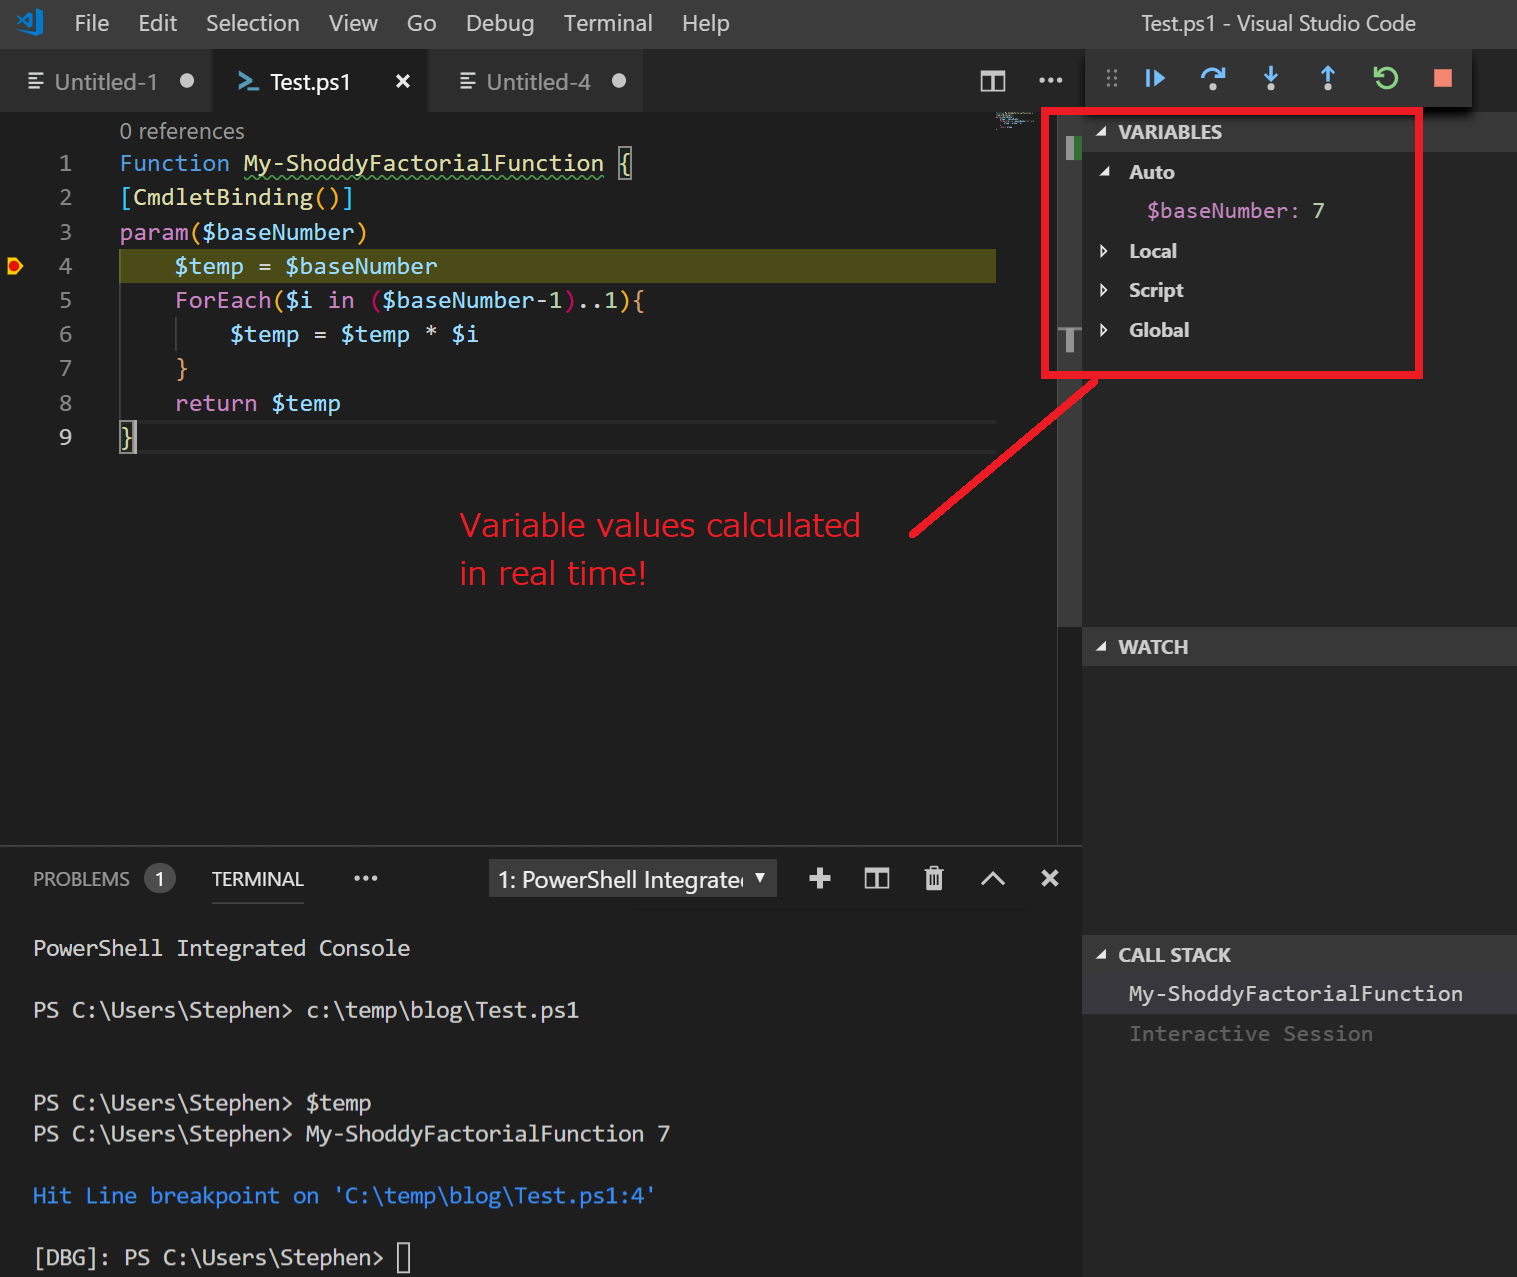 Depicts the Visual Studio Code application, paused at a breakpoint in a PowerShell script. The UI is broken into two columns, with the script on the left hand column with a command prompt beneath it. On the right column, there is a list of all variables and their current values. 